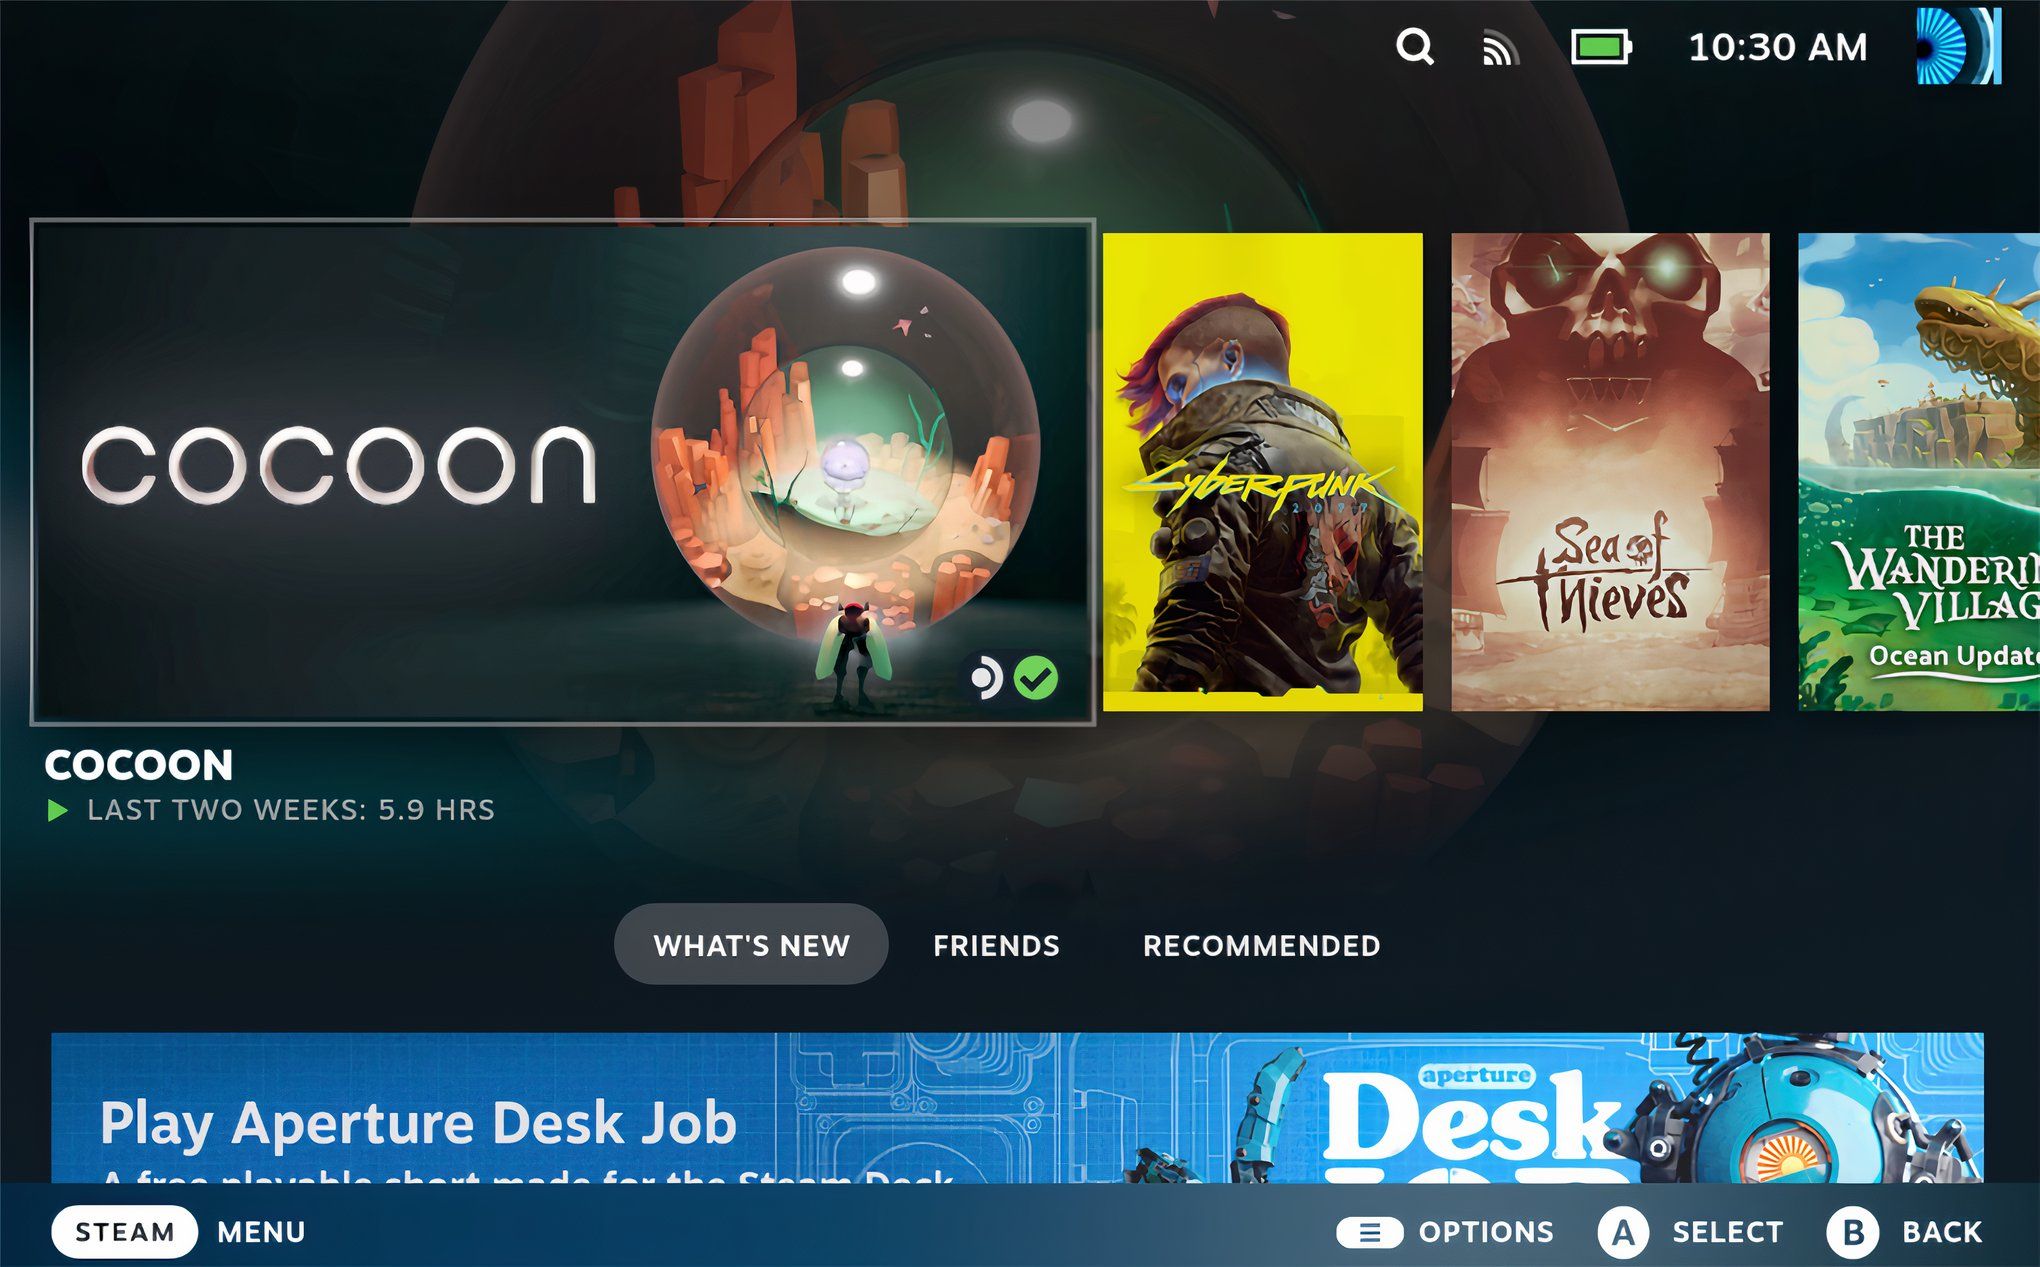 Steam store showing a carousel of games including Cocoon and Cyberpunk.